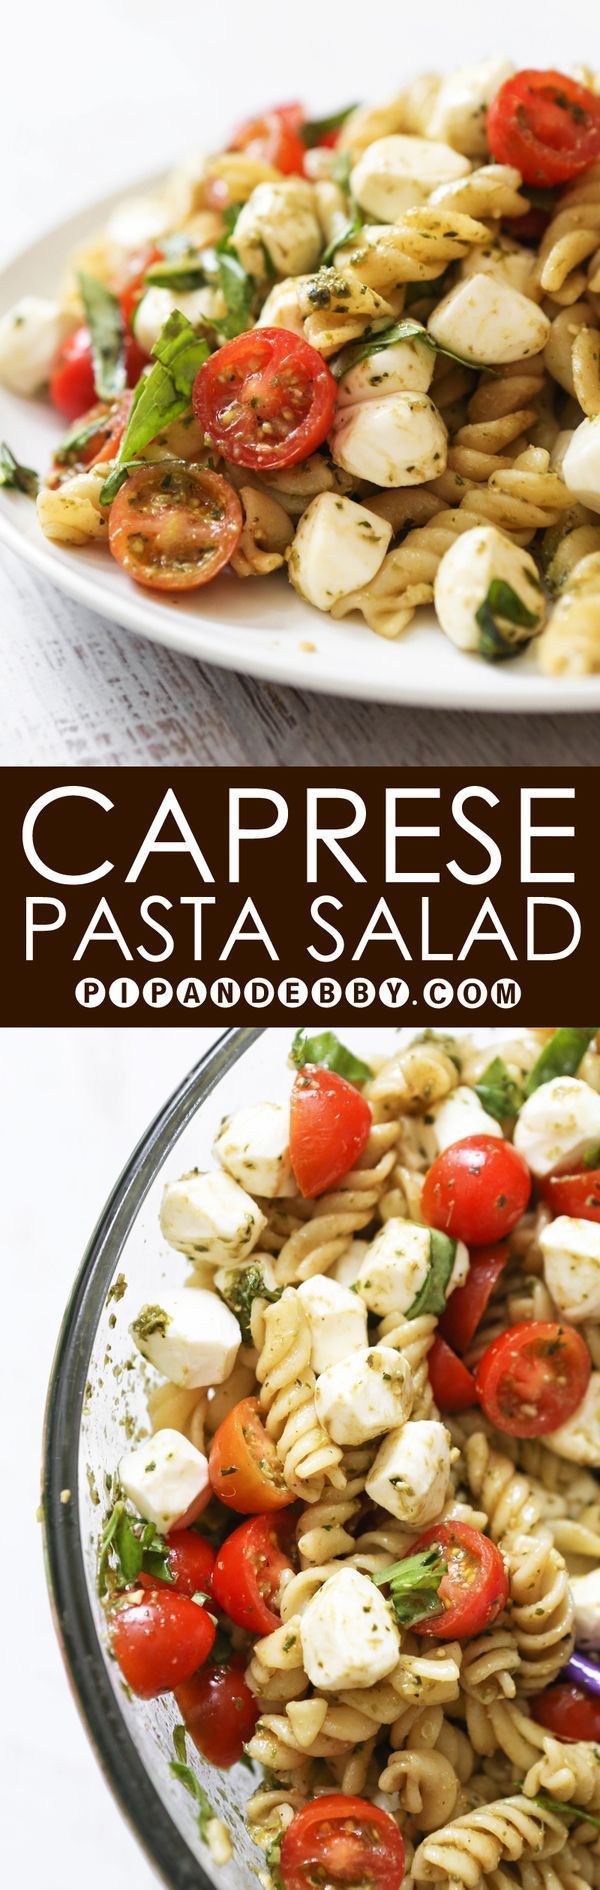 Caprese Pasta Salad | This perfect combination of ingredients is great as an appetizer or a salad.